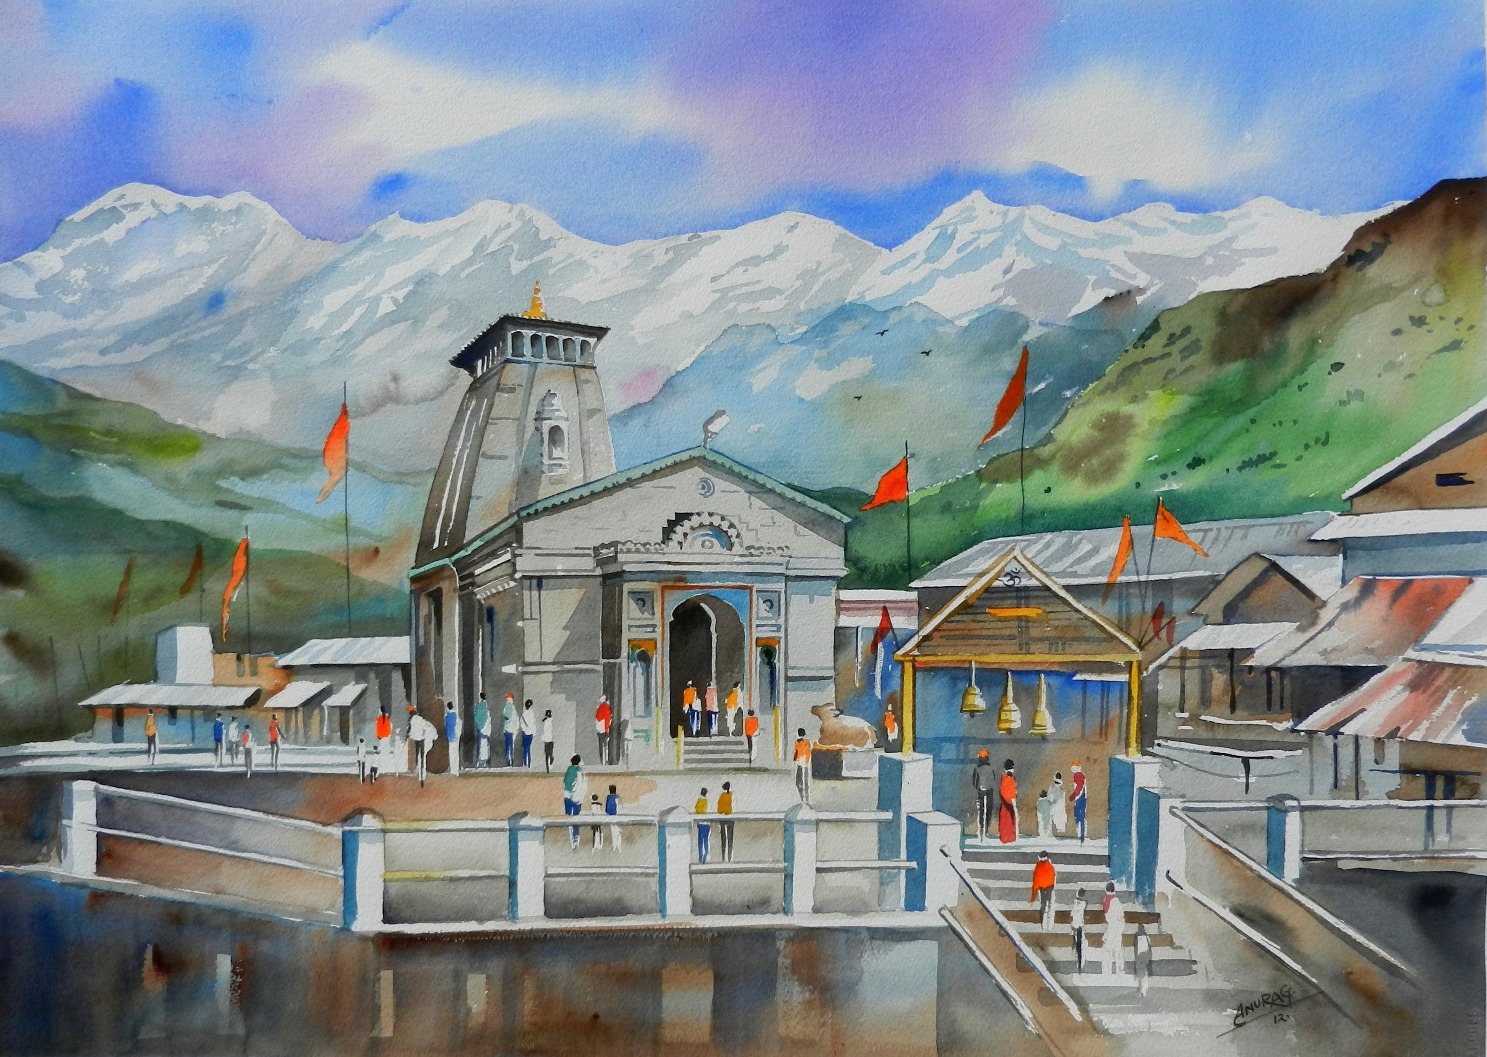 Once upon a time at Kedarnath 4276